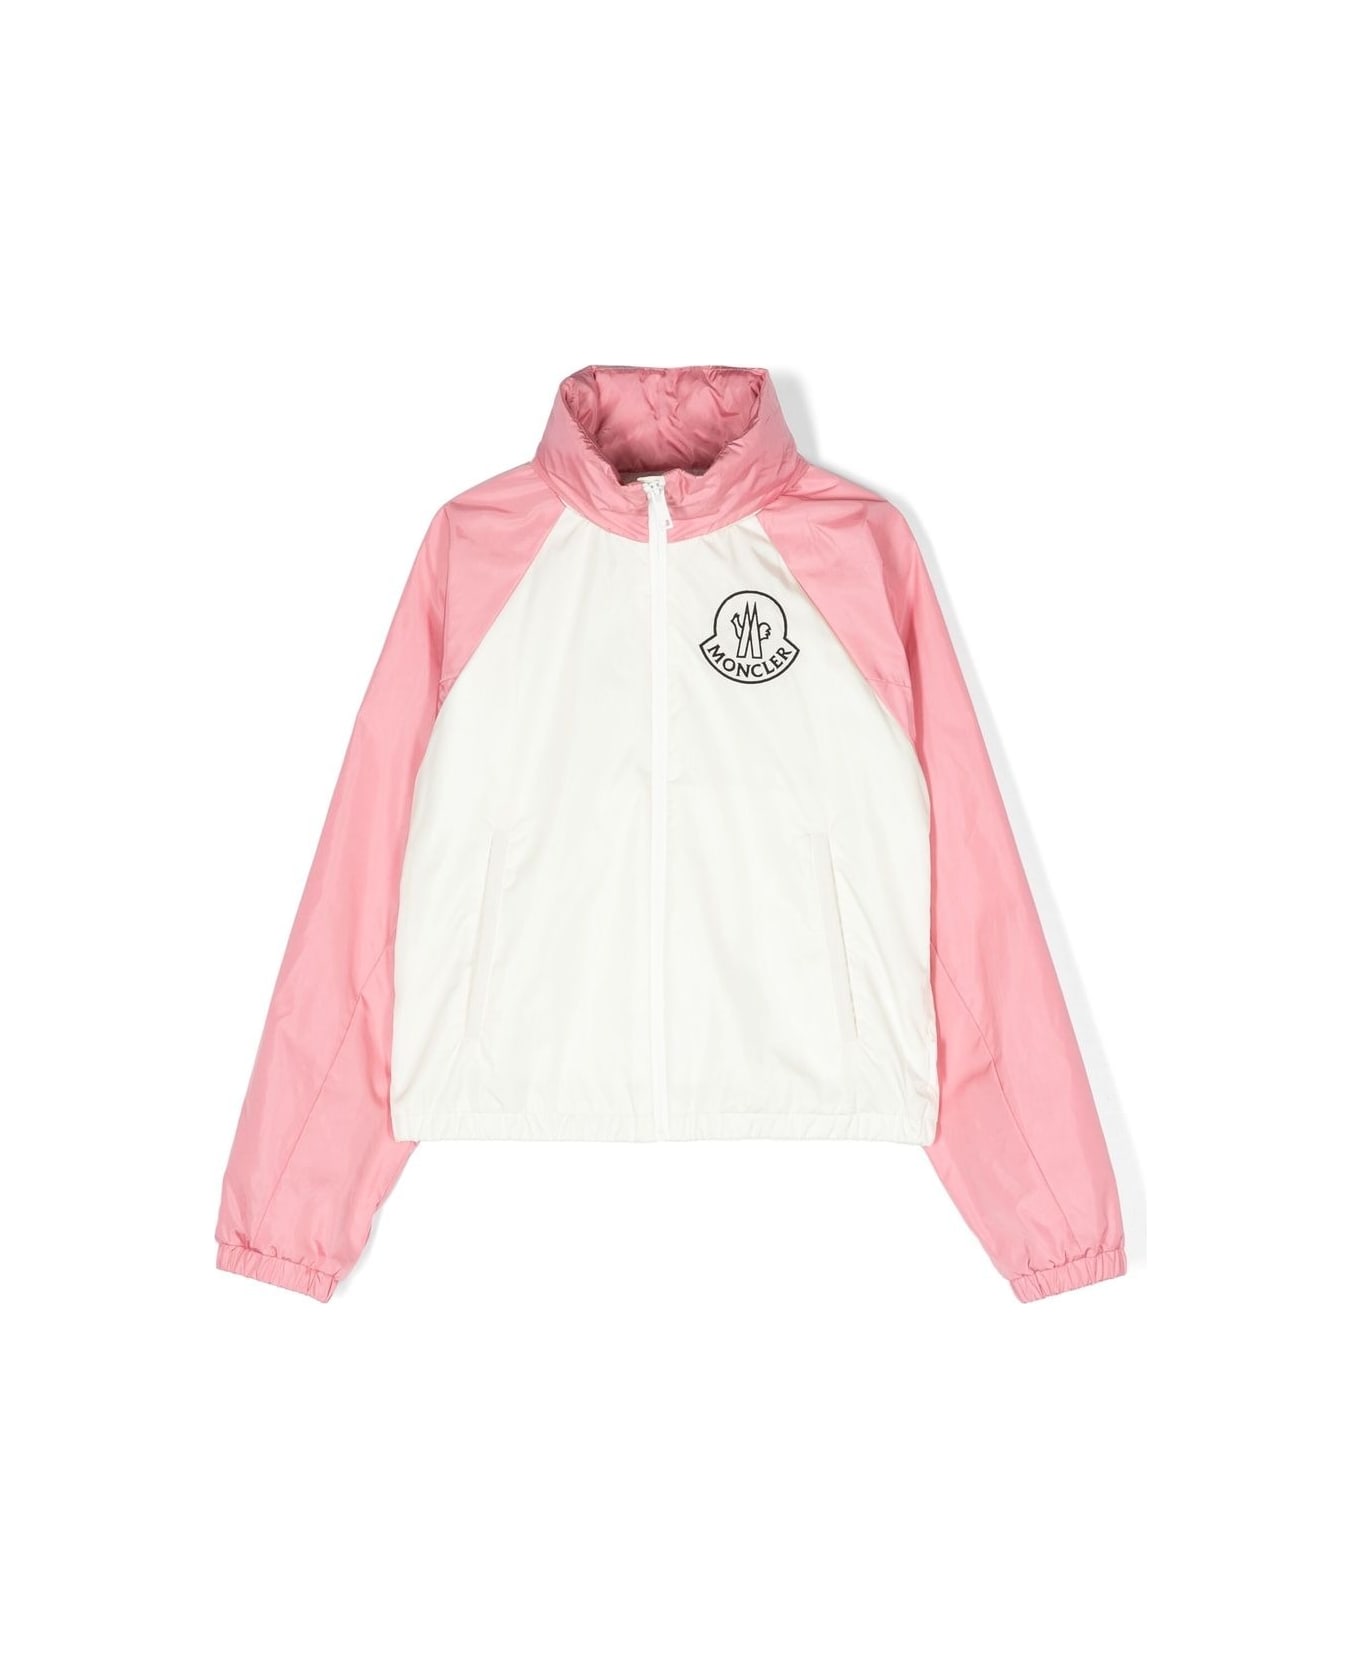 Moncler Enabish Windbreaker In White And Pink - PINK